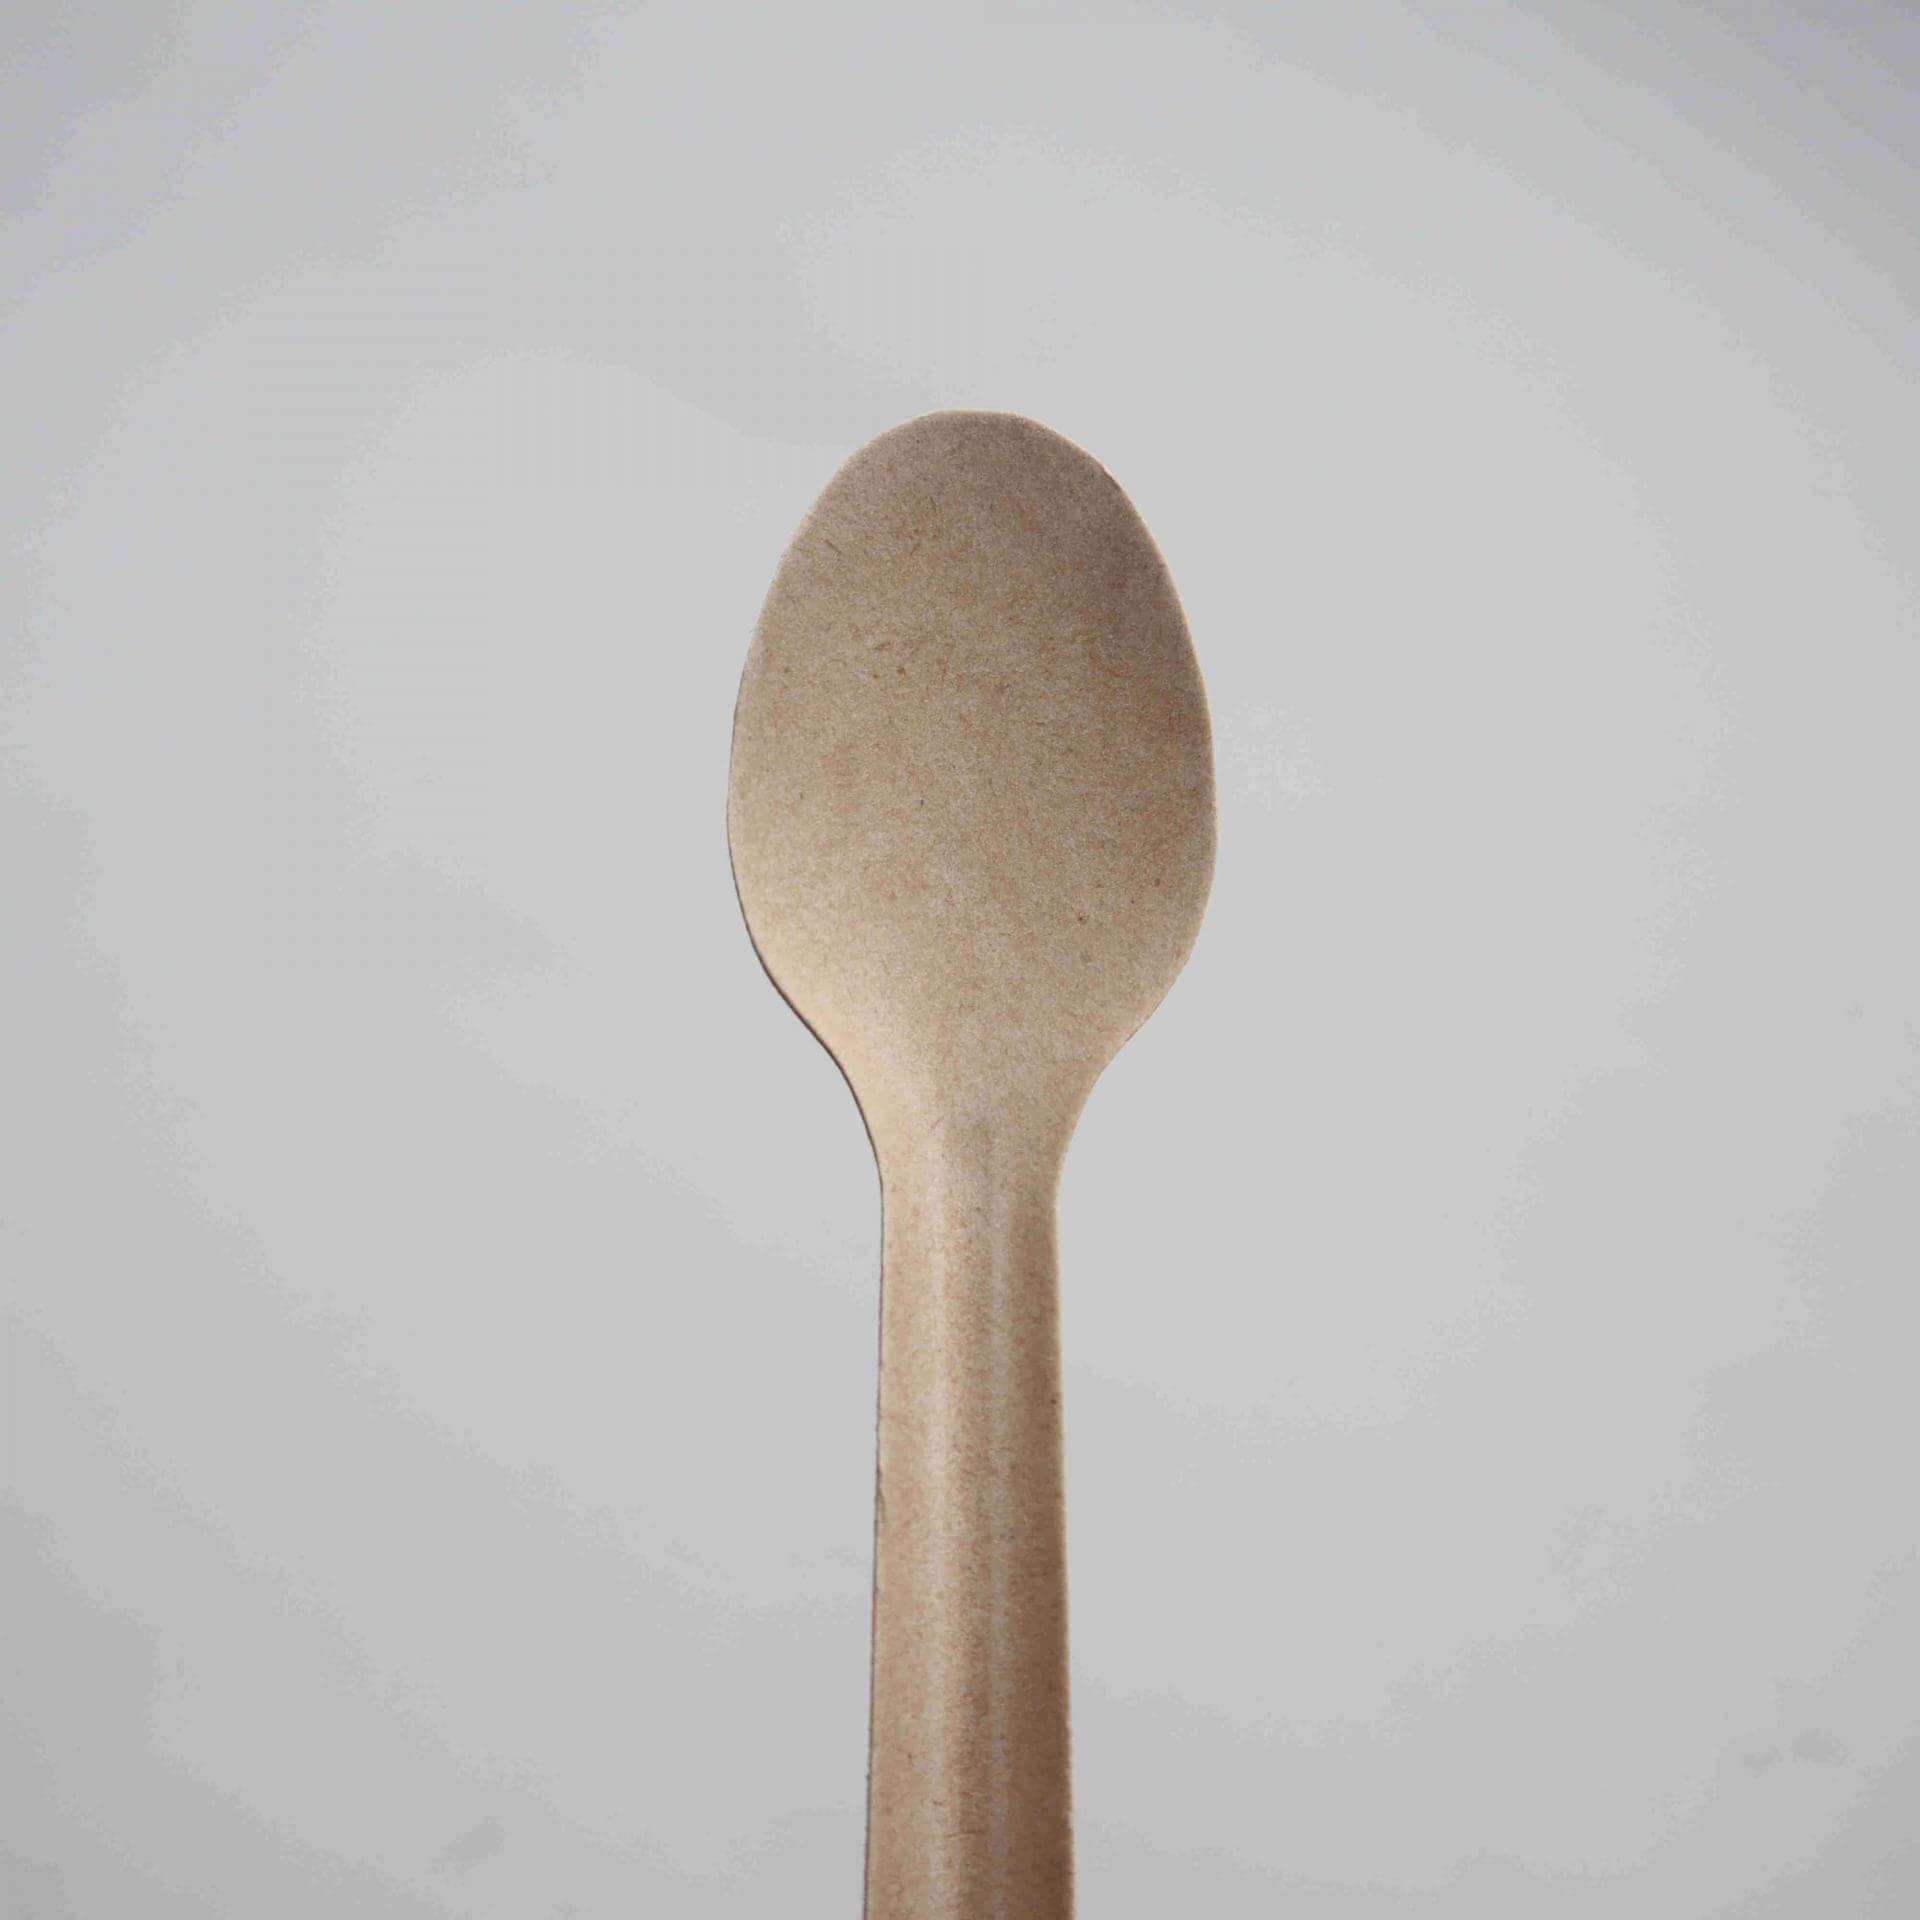 4.6inch Mini sugarcane tasing spoons, biodegradable & compostable